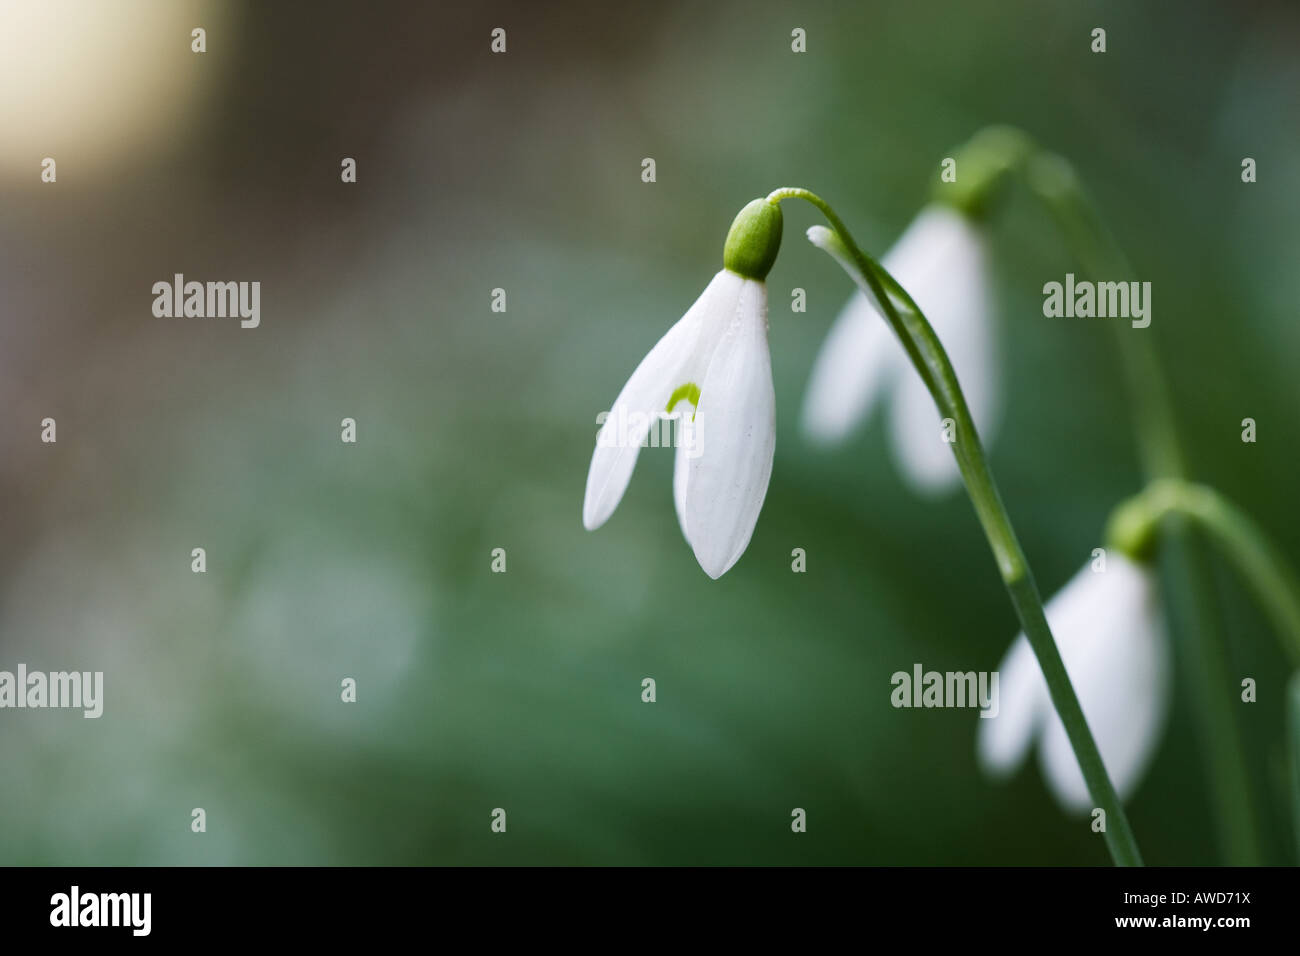 Snowdrops against green background Stock Photo